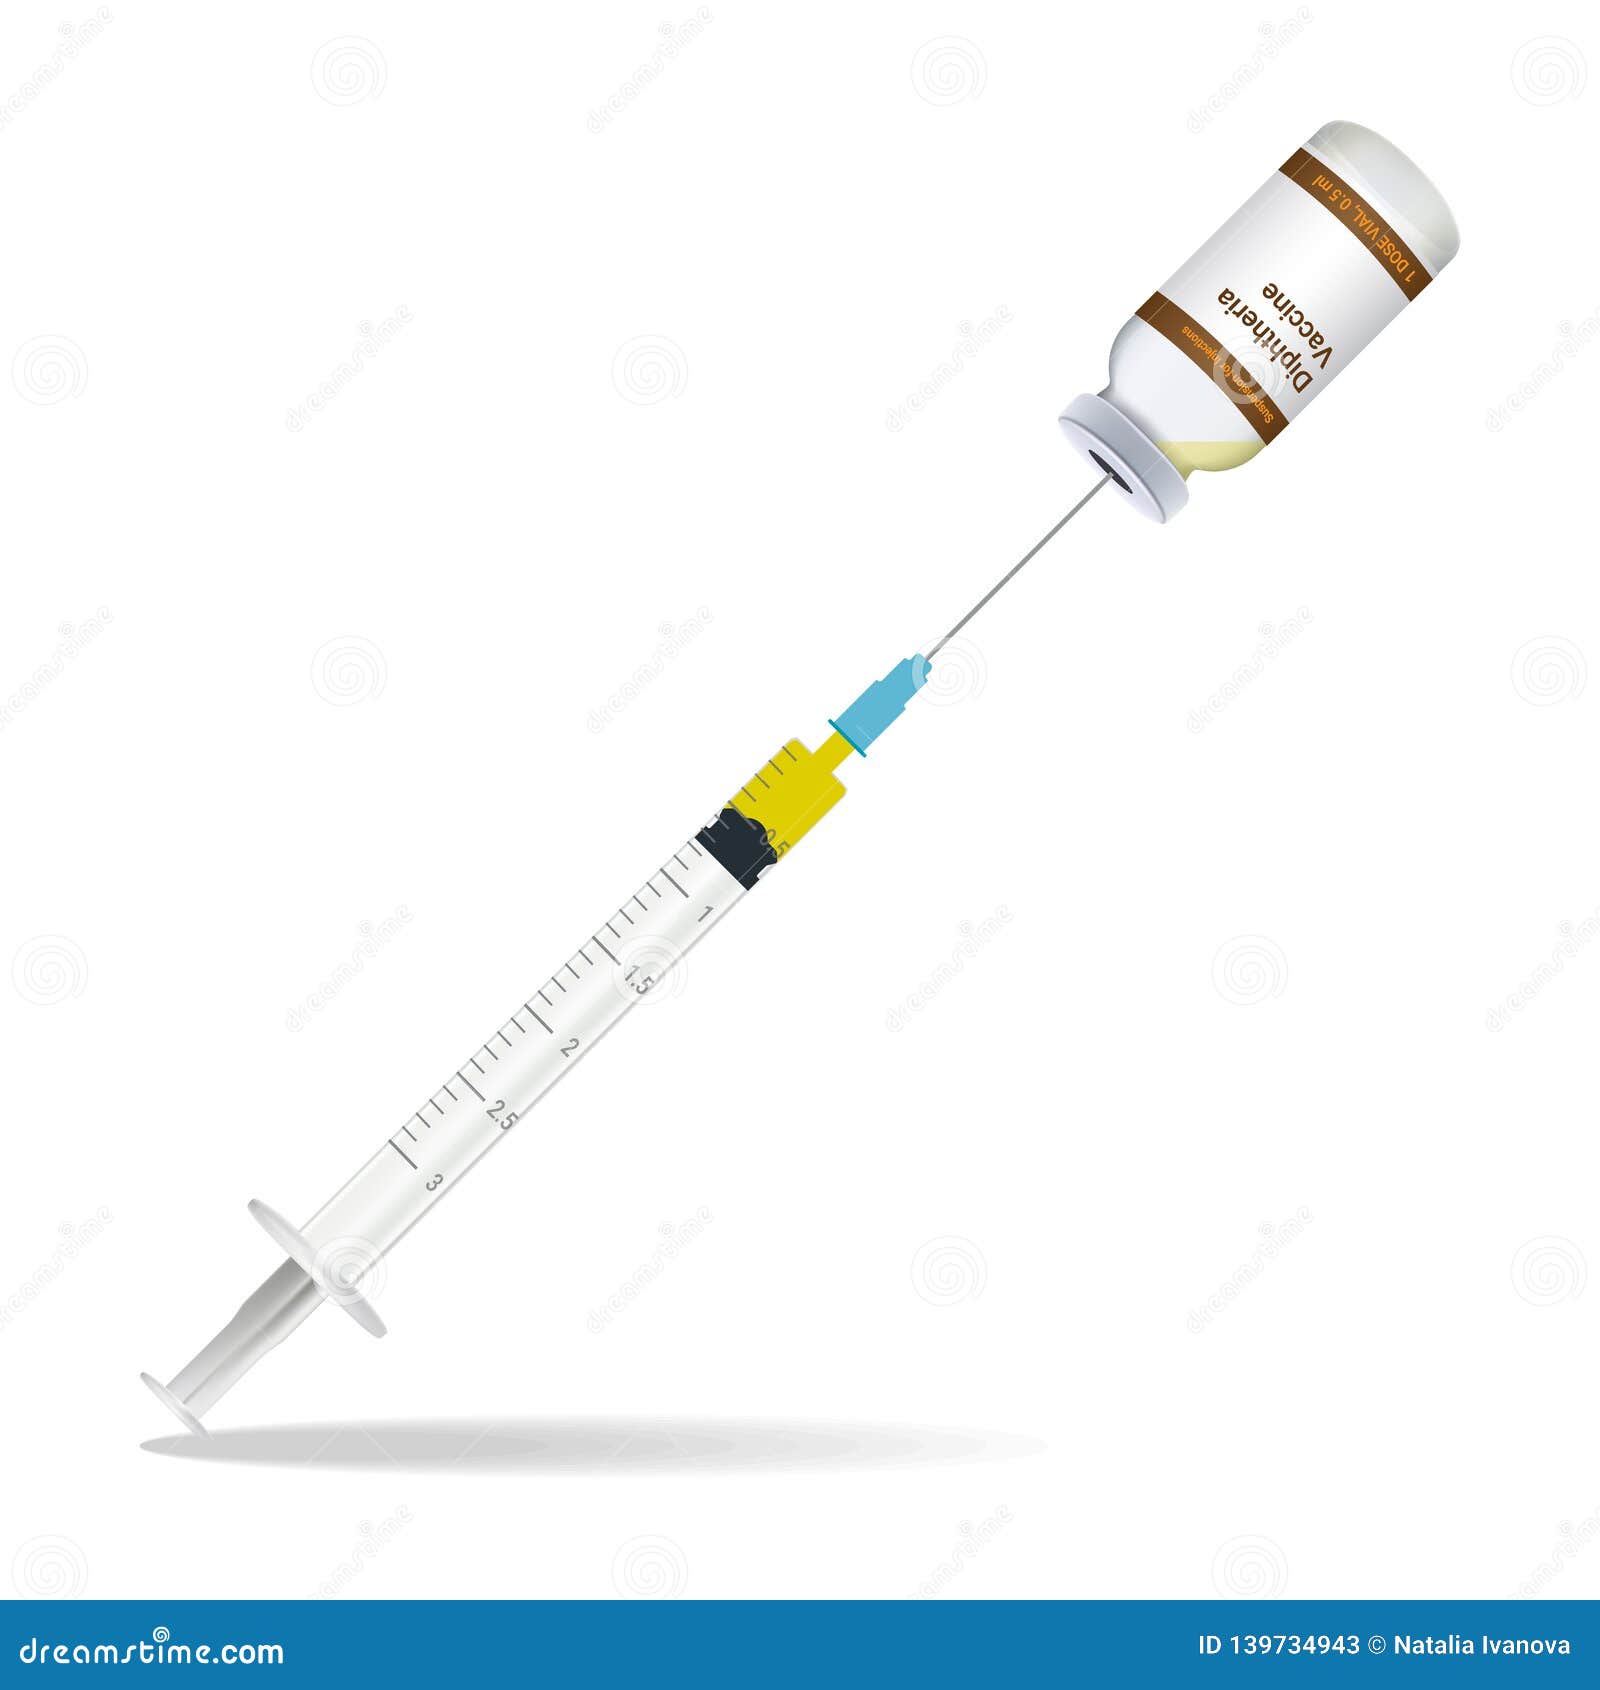 immunization, diphtheria vaccine syringe contain some injection and injection bottle  on a white background